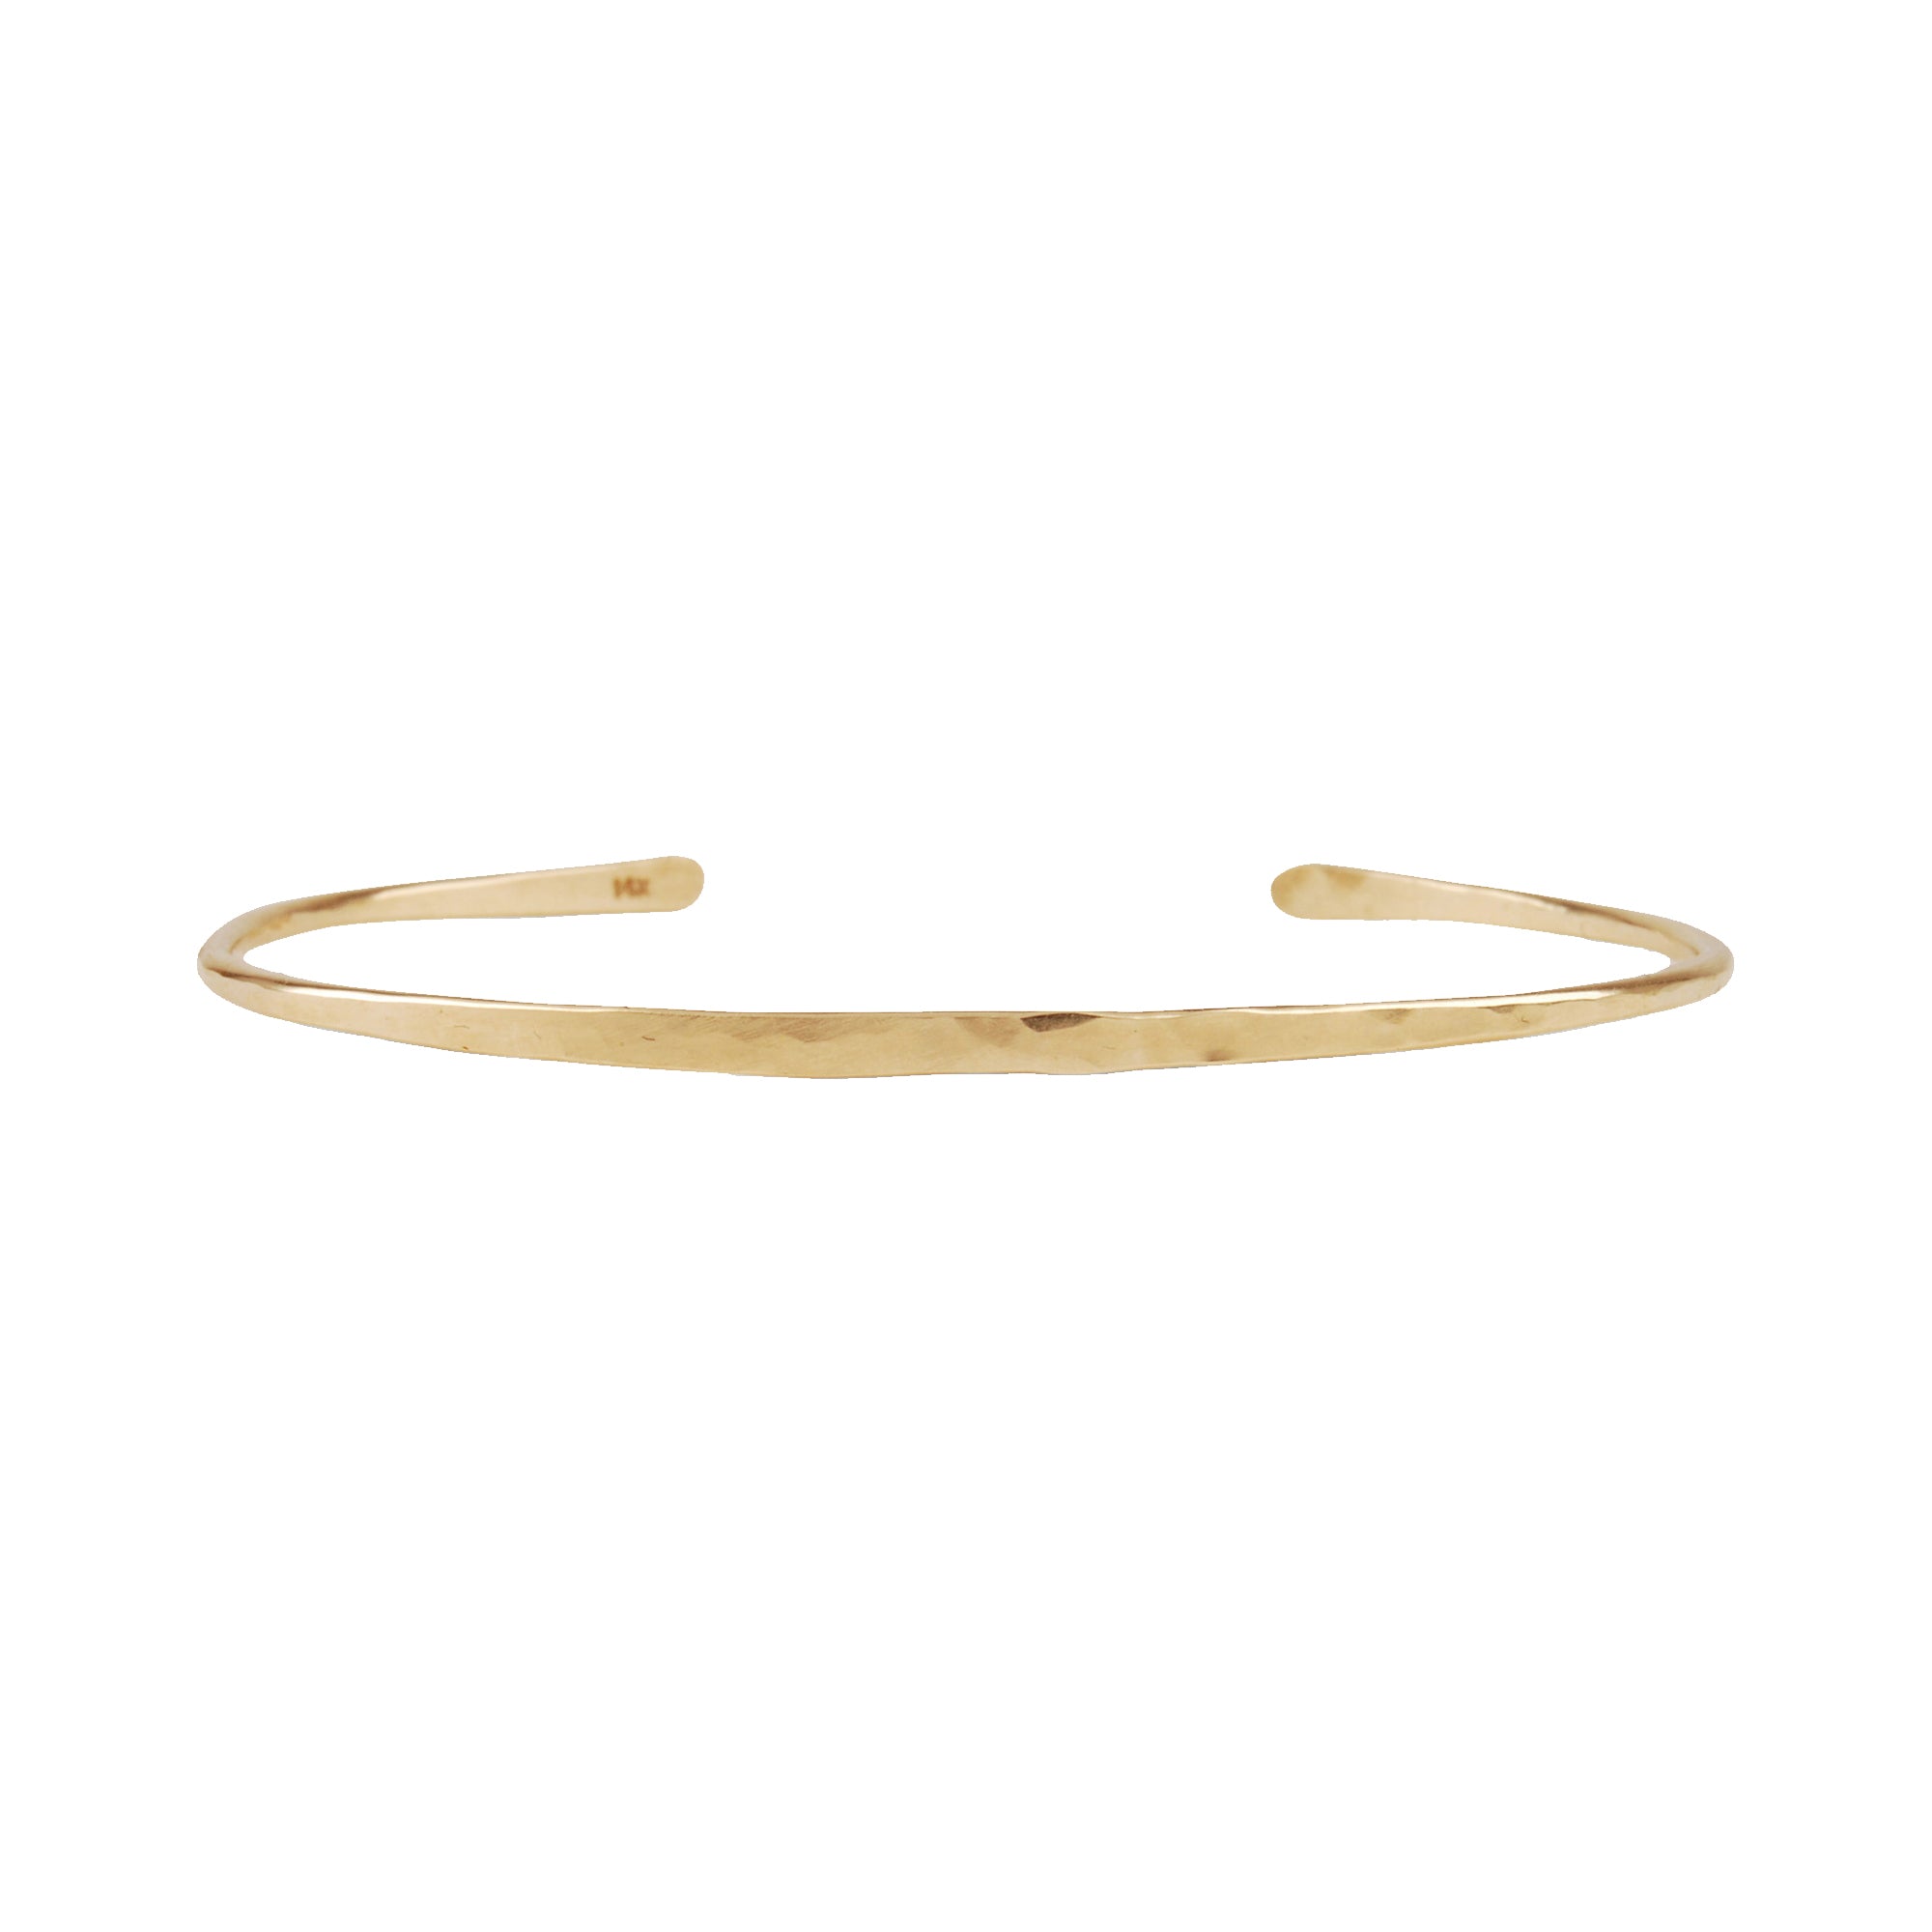 14k gold Thin Cuff, hand-forged and hammered, this modern cuff fits snugly around the curve of your wrist. 